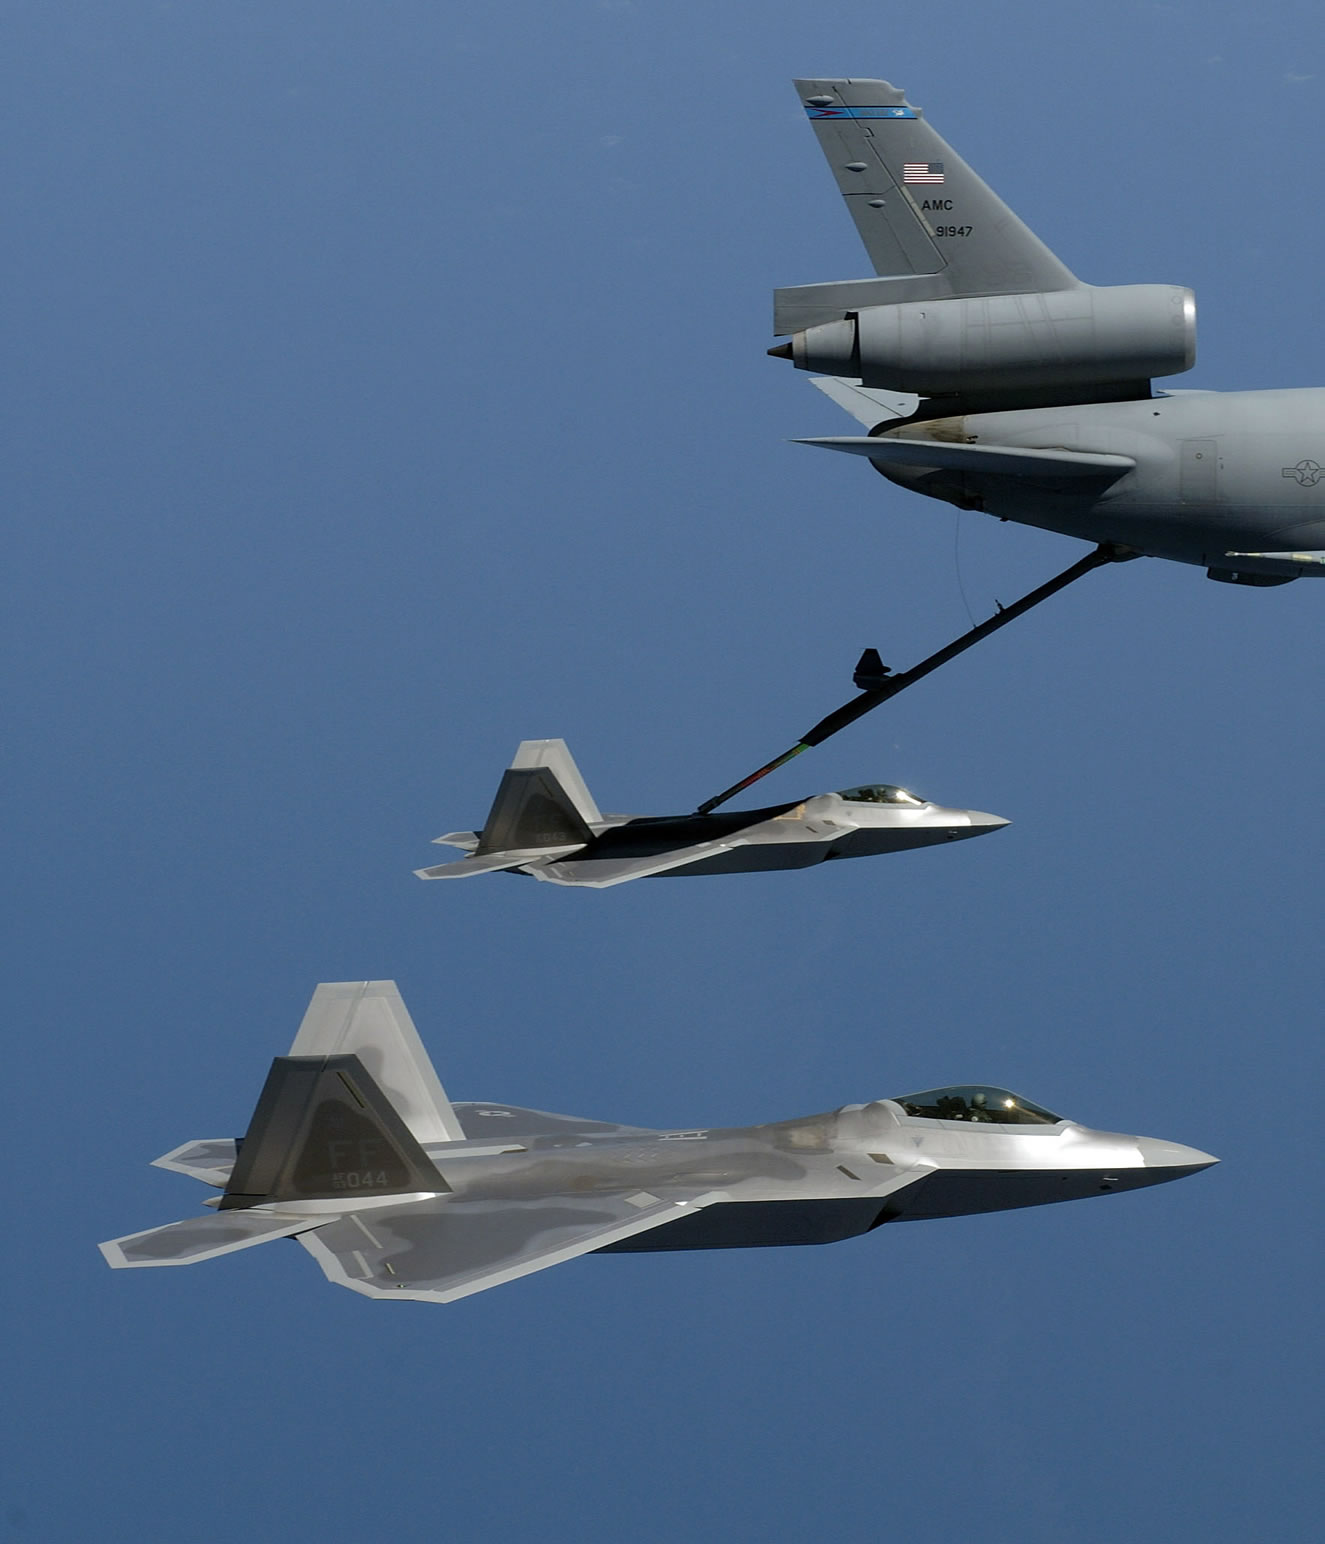 Free Military Desktop Wallpaper - Bombers, Fighter Jets and more Photos